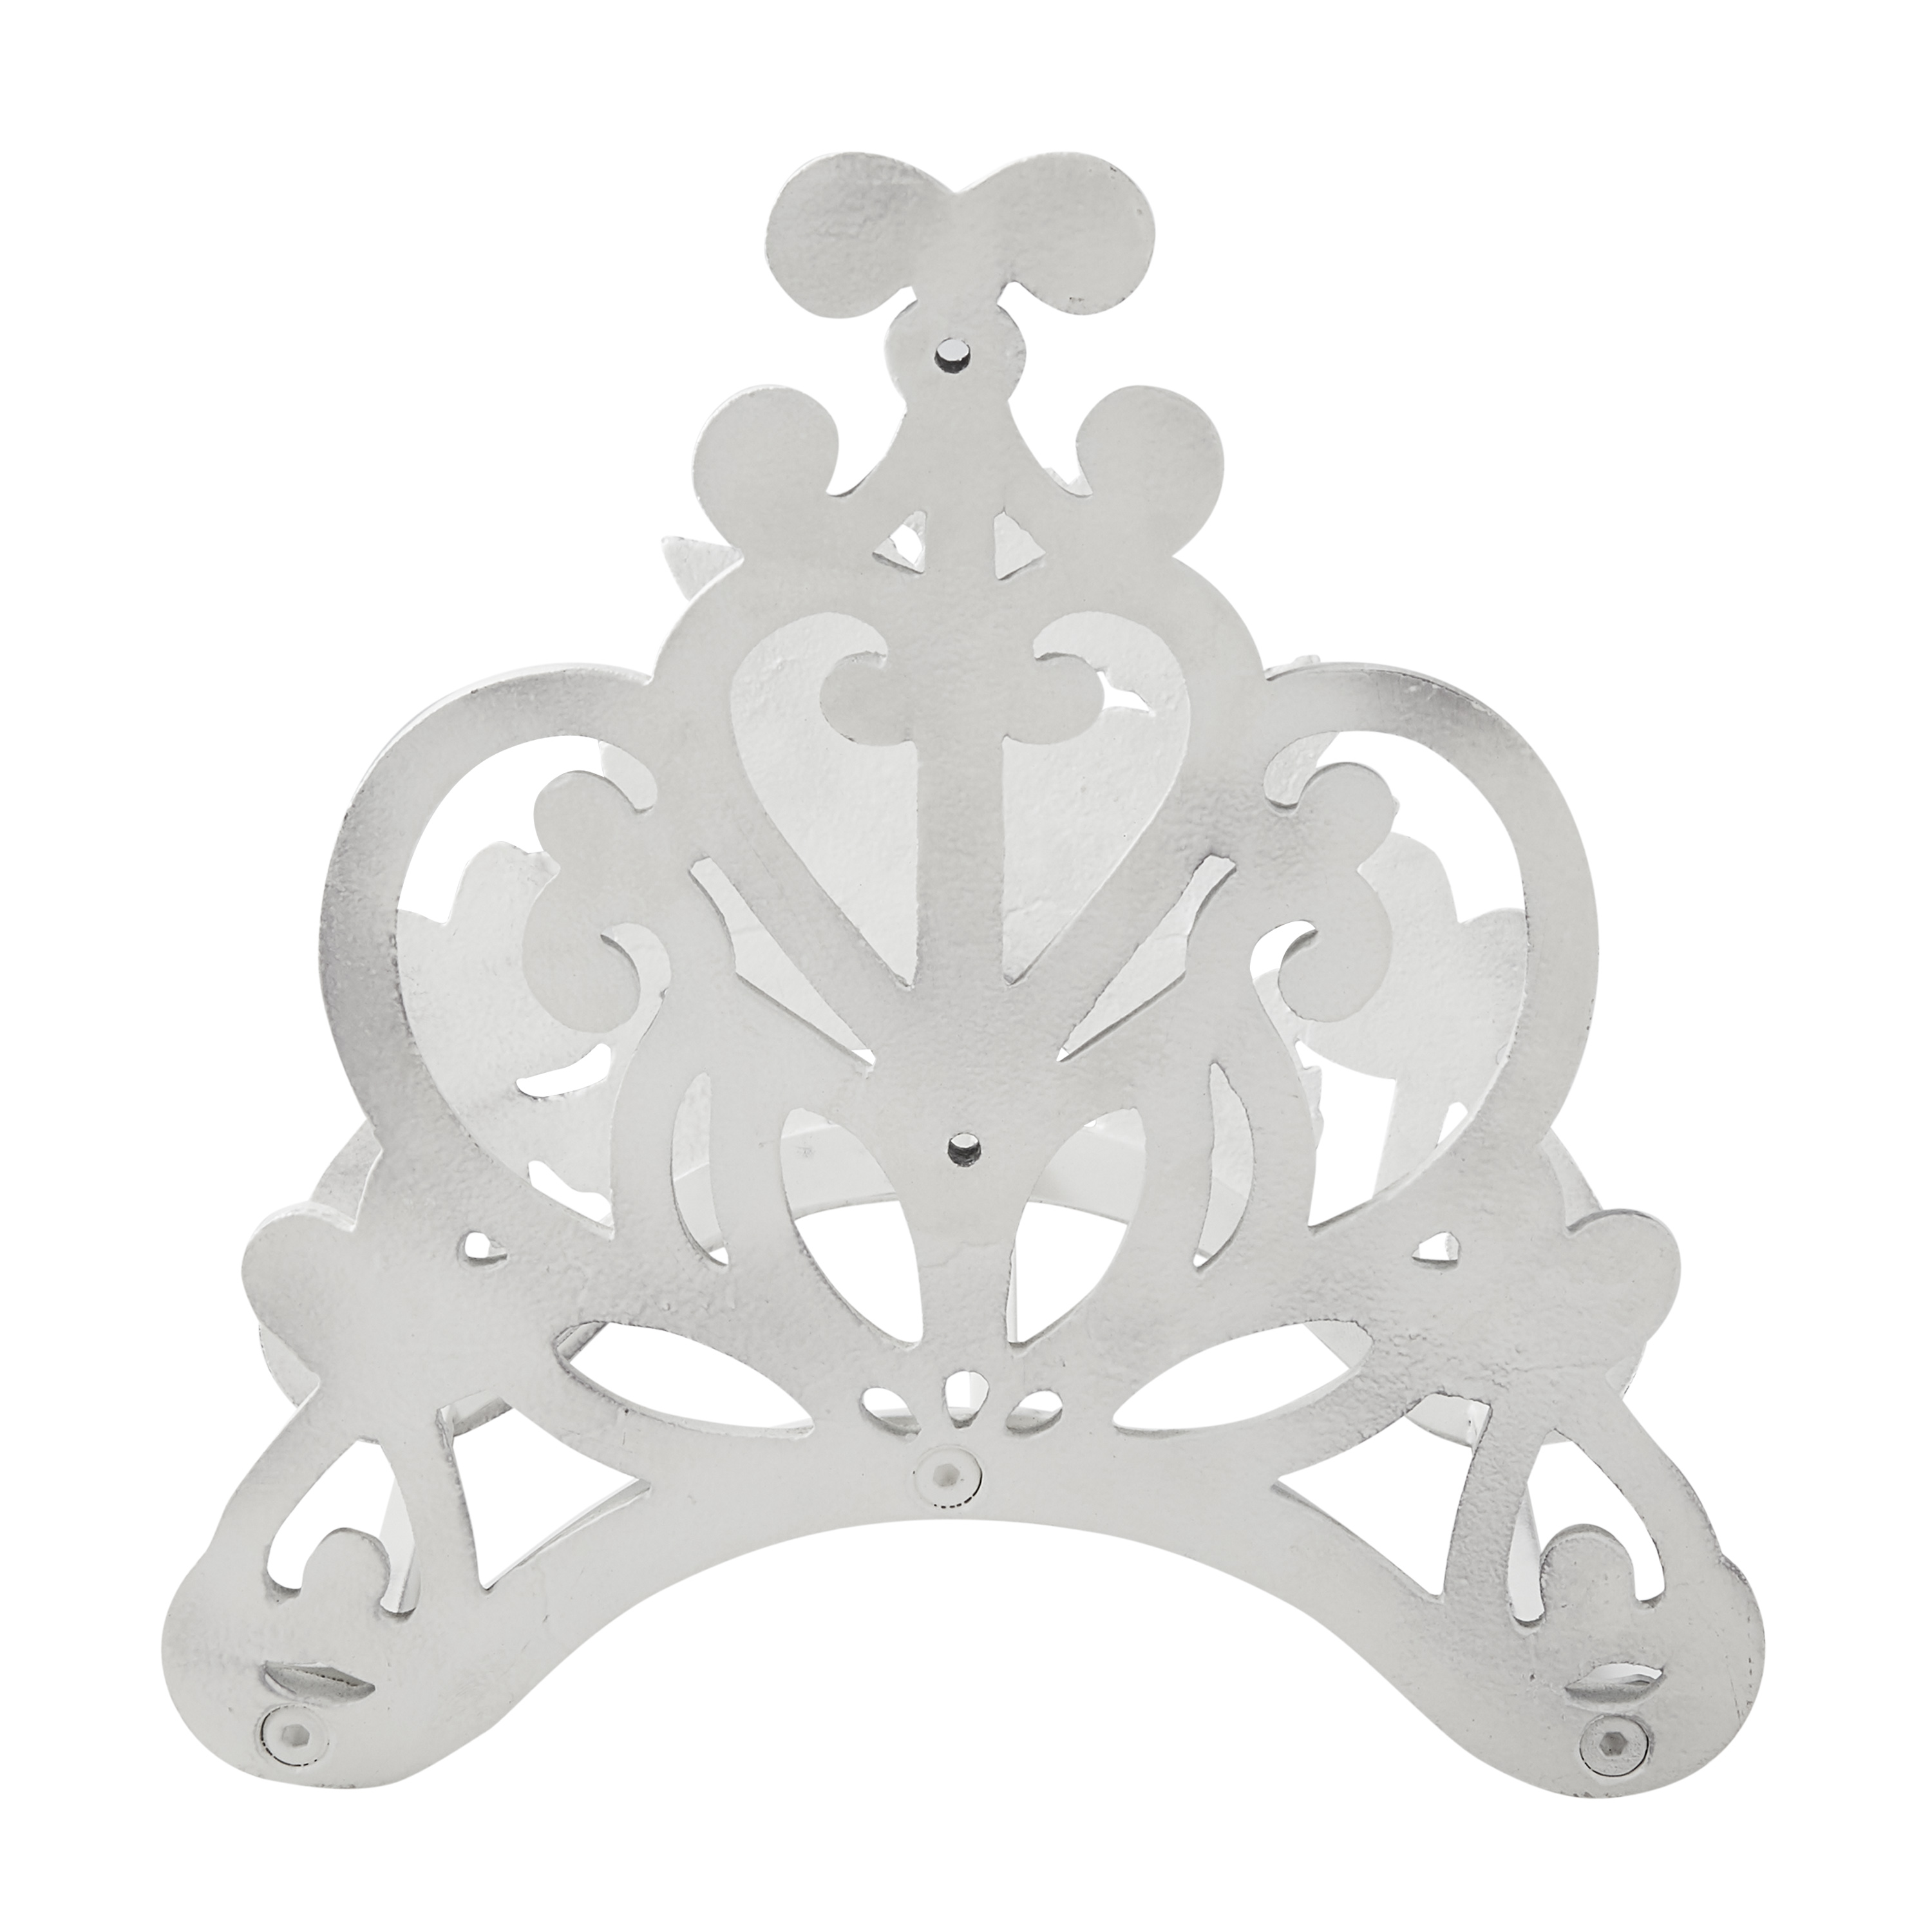 The Pioneer Woman Decorative Metal Floral Hose Hanger, White - image 5 of 7